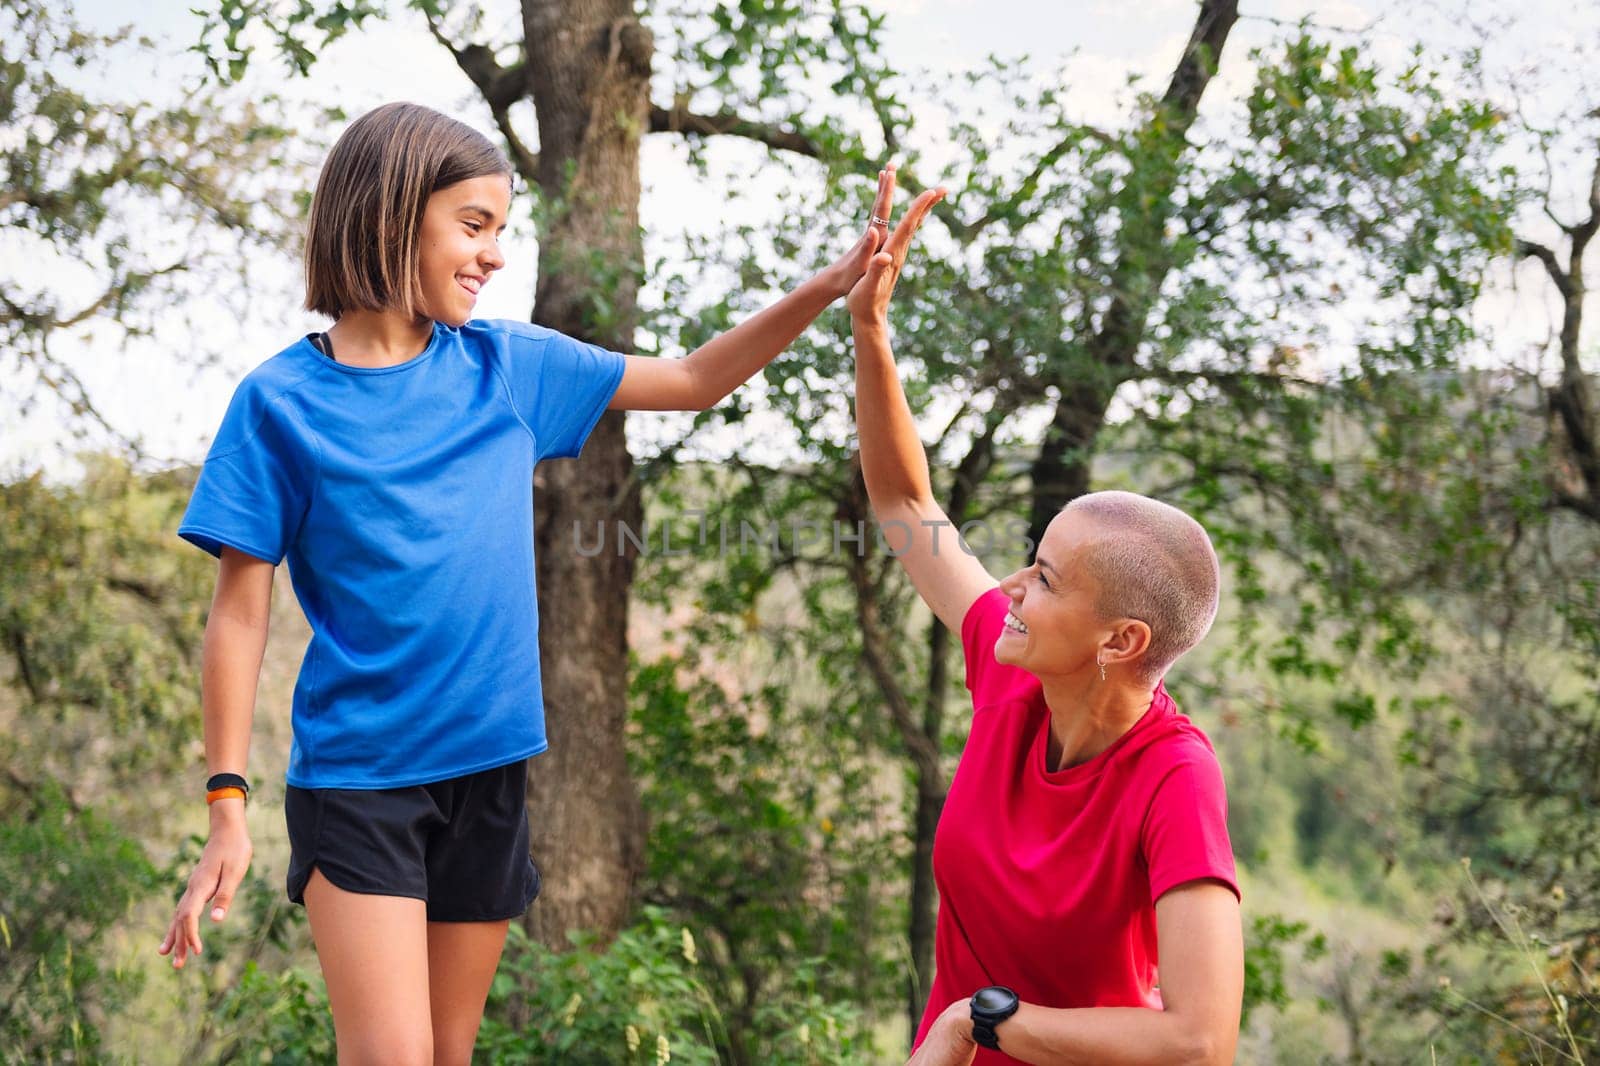 mother and daughter giving a high five during their training in the woods, concept of sport with children in nature and active lifestyle